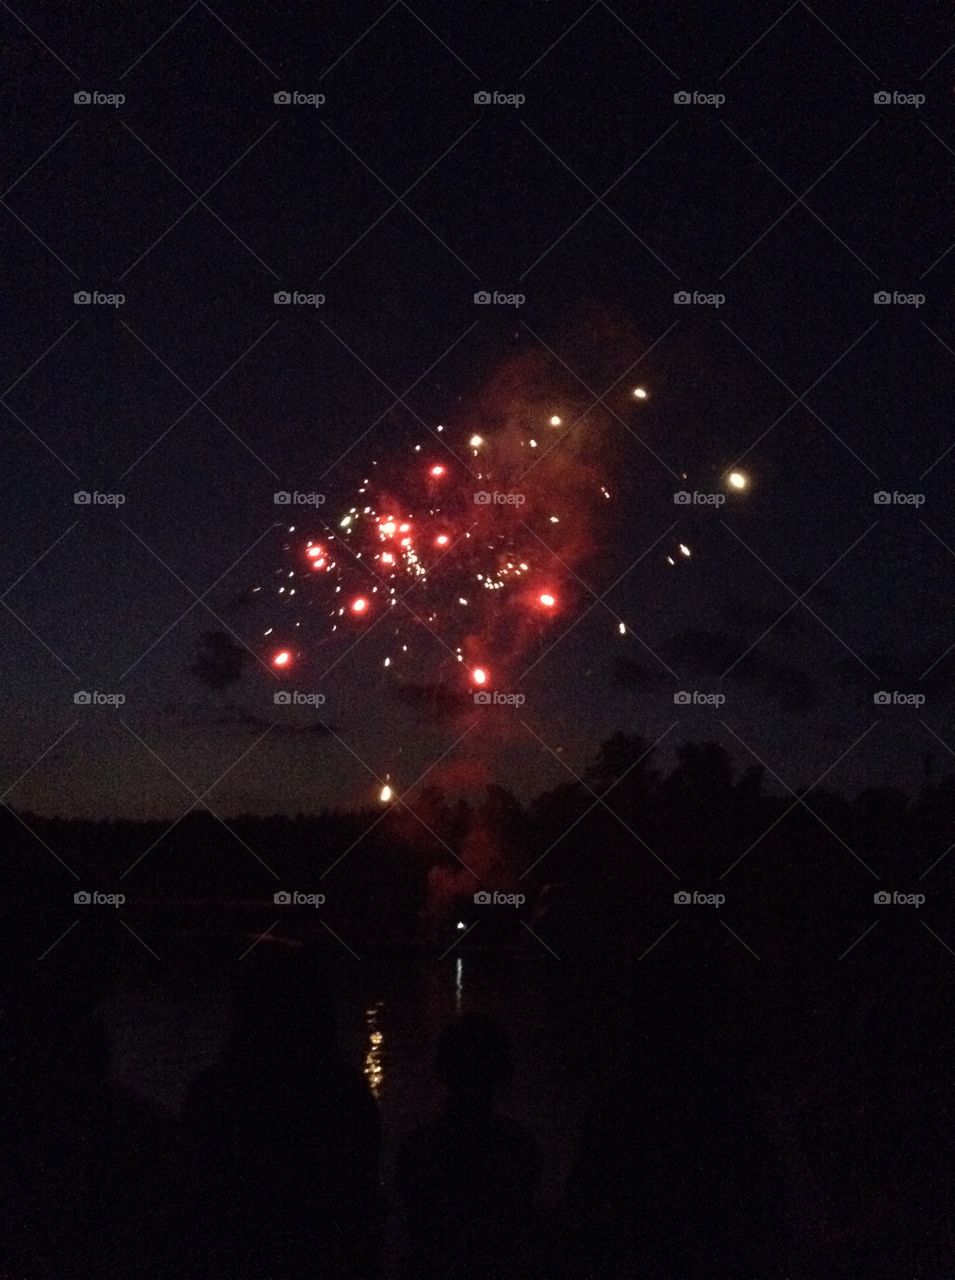 4th of July 2018